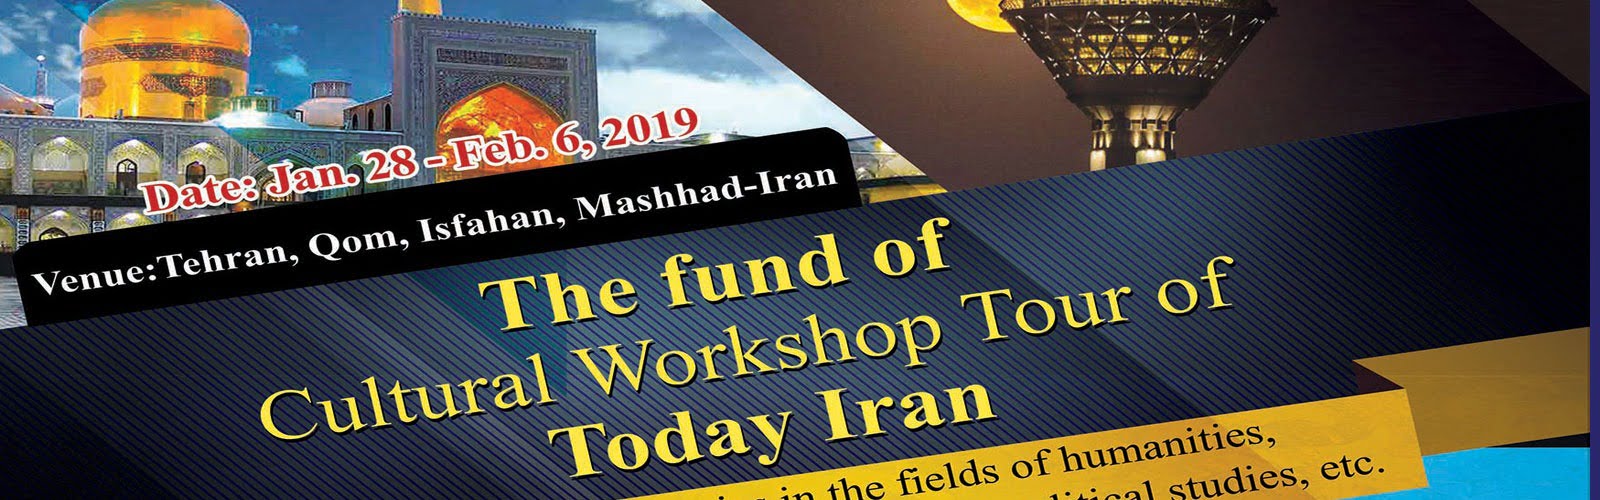 The entire fee of the Cultural Workshop Tour of Today Iran including accommodation, food, domestic transportation, tickets of tourist sites are supplied by the sponsoring institutions